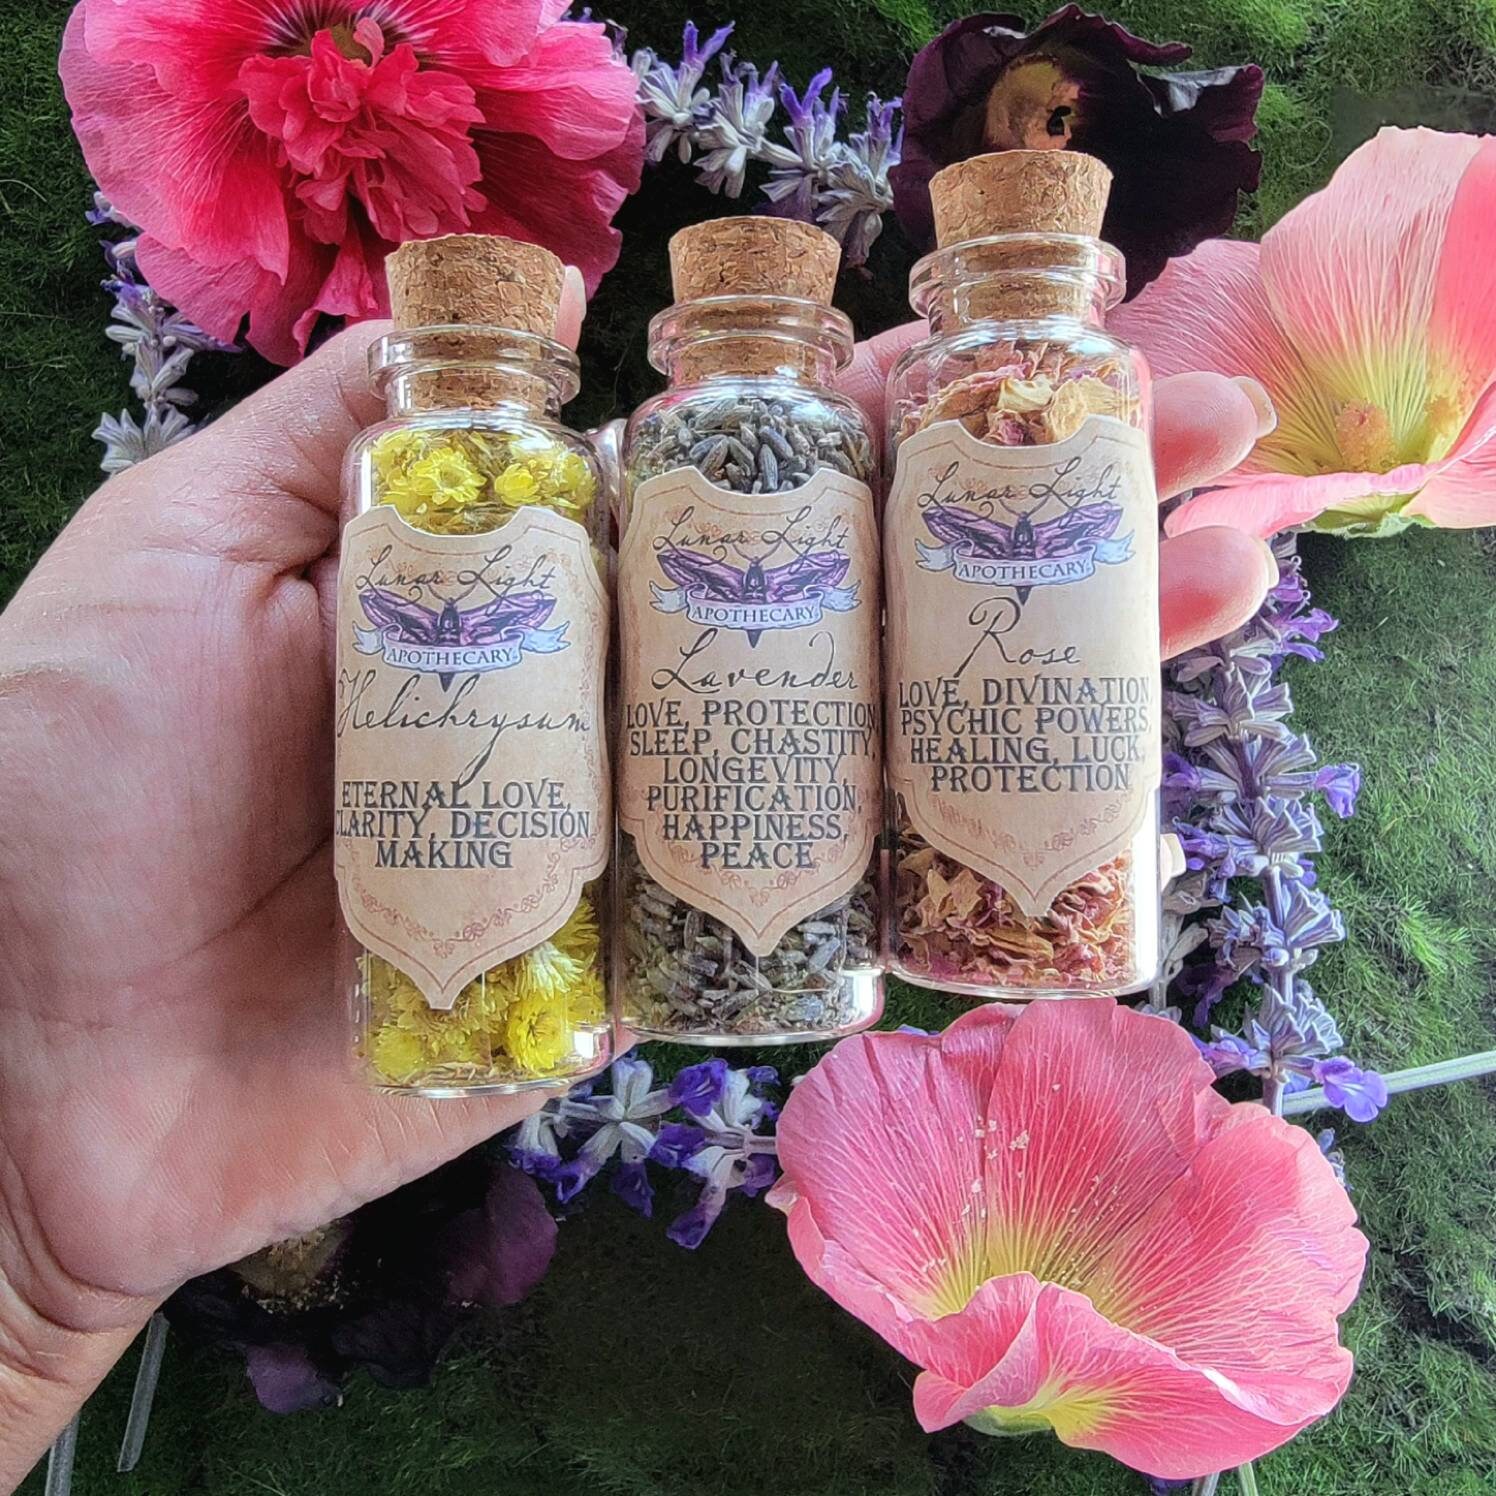 1.5 Oz Herbal Bottles Dried Herb Vial Witchcraft Herbs Witches Apothecary  Herbal Tea Spell Supplies Loose Incense H 